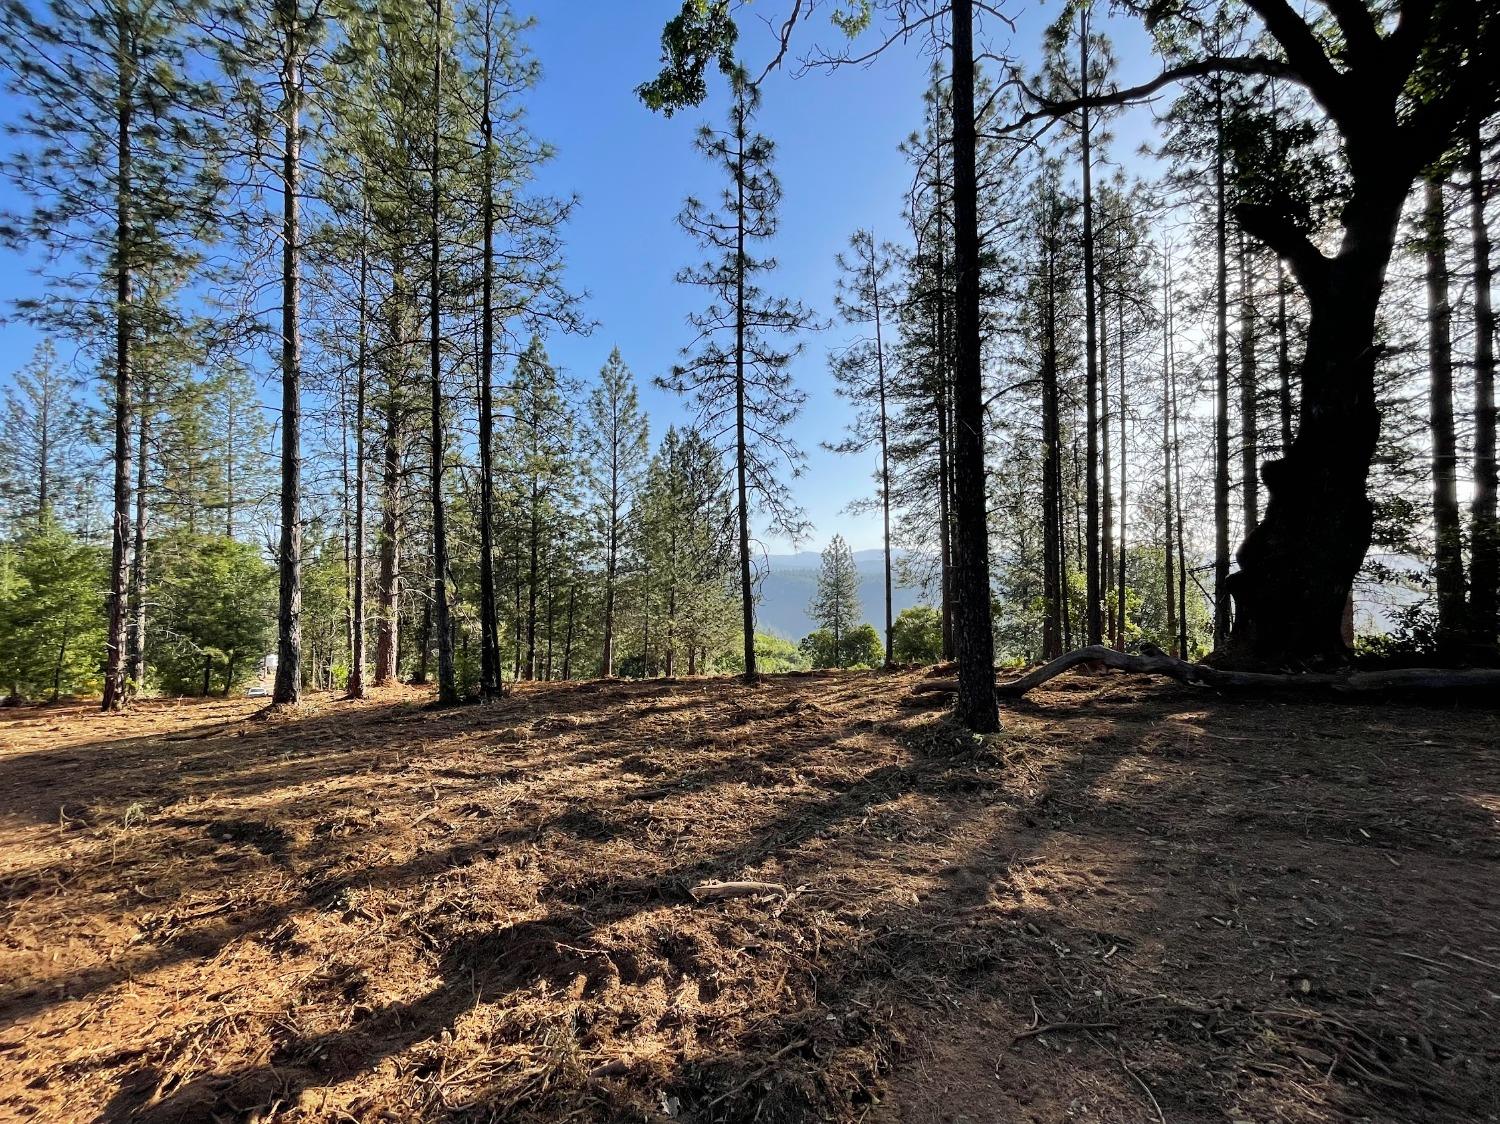 Beautiful ridge top 20 acre property with opportunity for Views of the American River and Snow Capped Mountains!  Build your dream home on this private property. The Well on property produces 6.5gpm. Nice mix of Oak and Pine Trees.  Close to Placerville and Georgetown. Adjoining 20 acre parcel APN# 084-020-036-000 is for sale as well. Amazing opportunity! Seller is open to Seller Financing with at least 50% down.